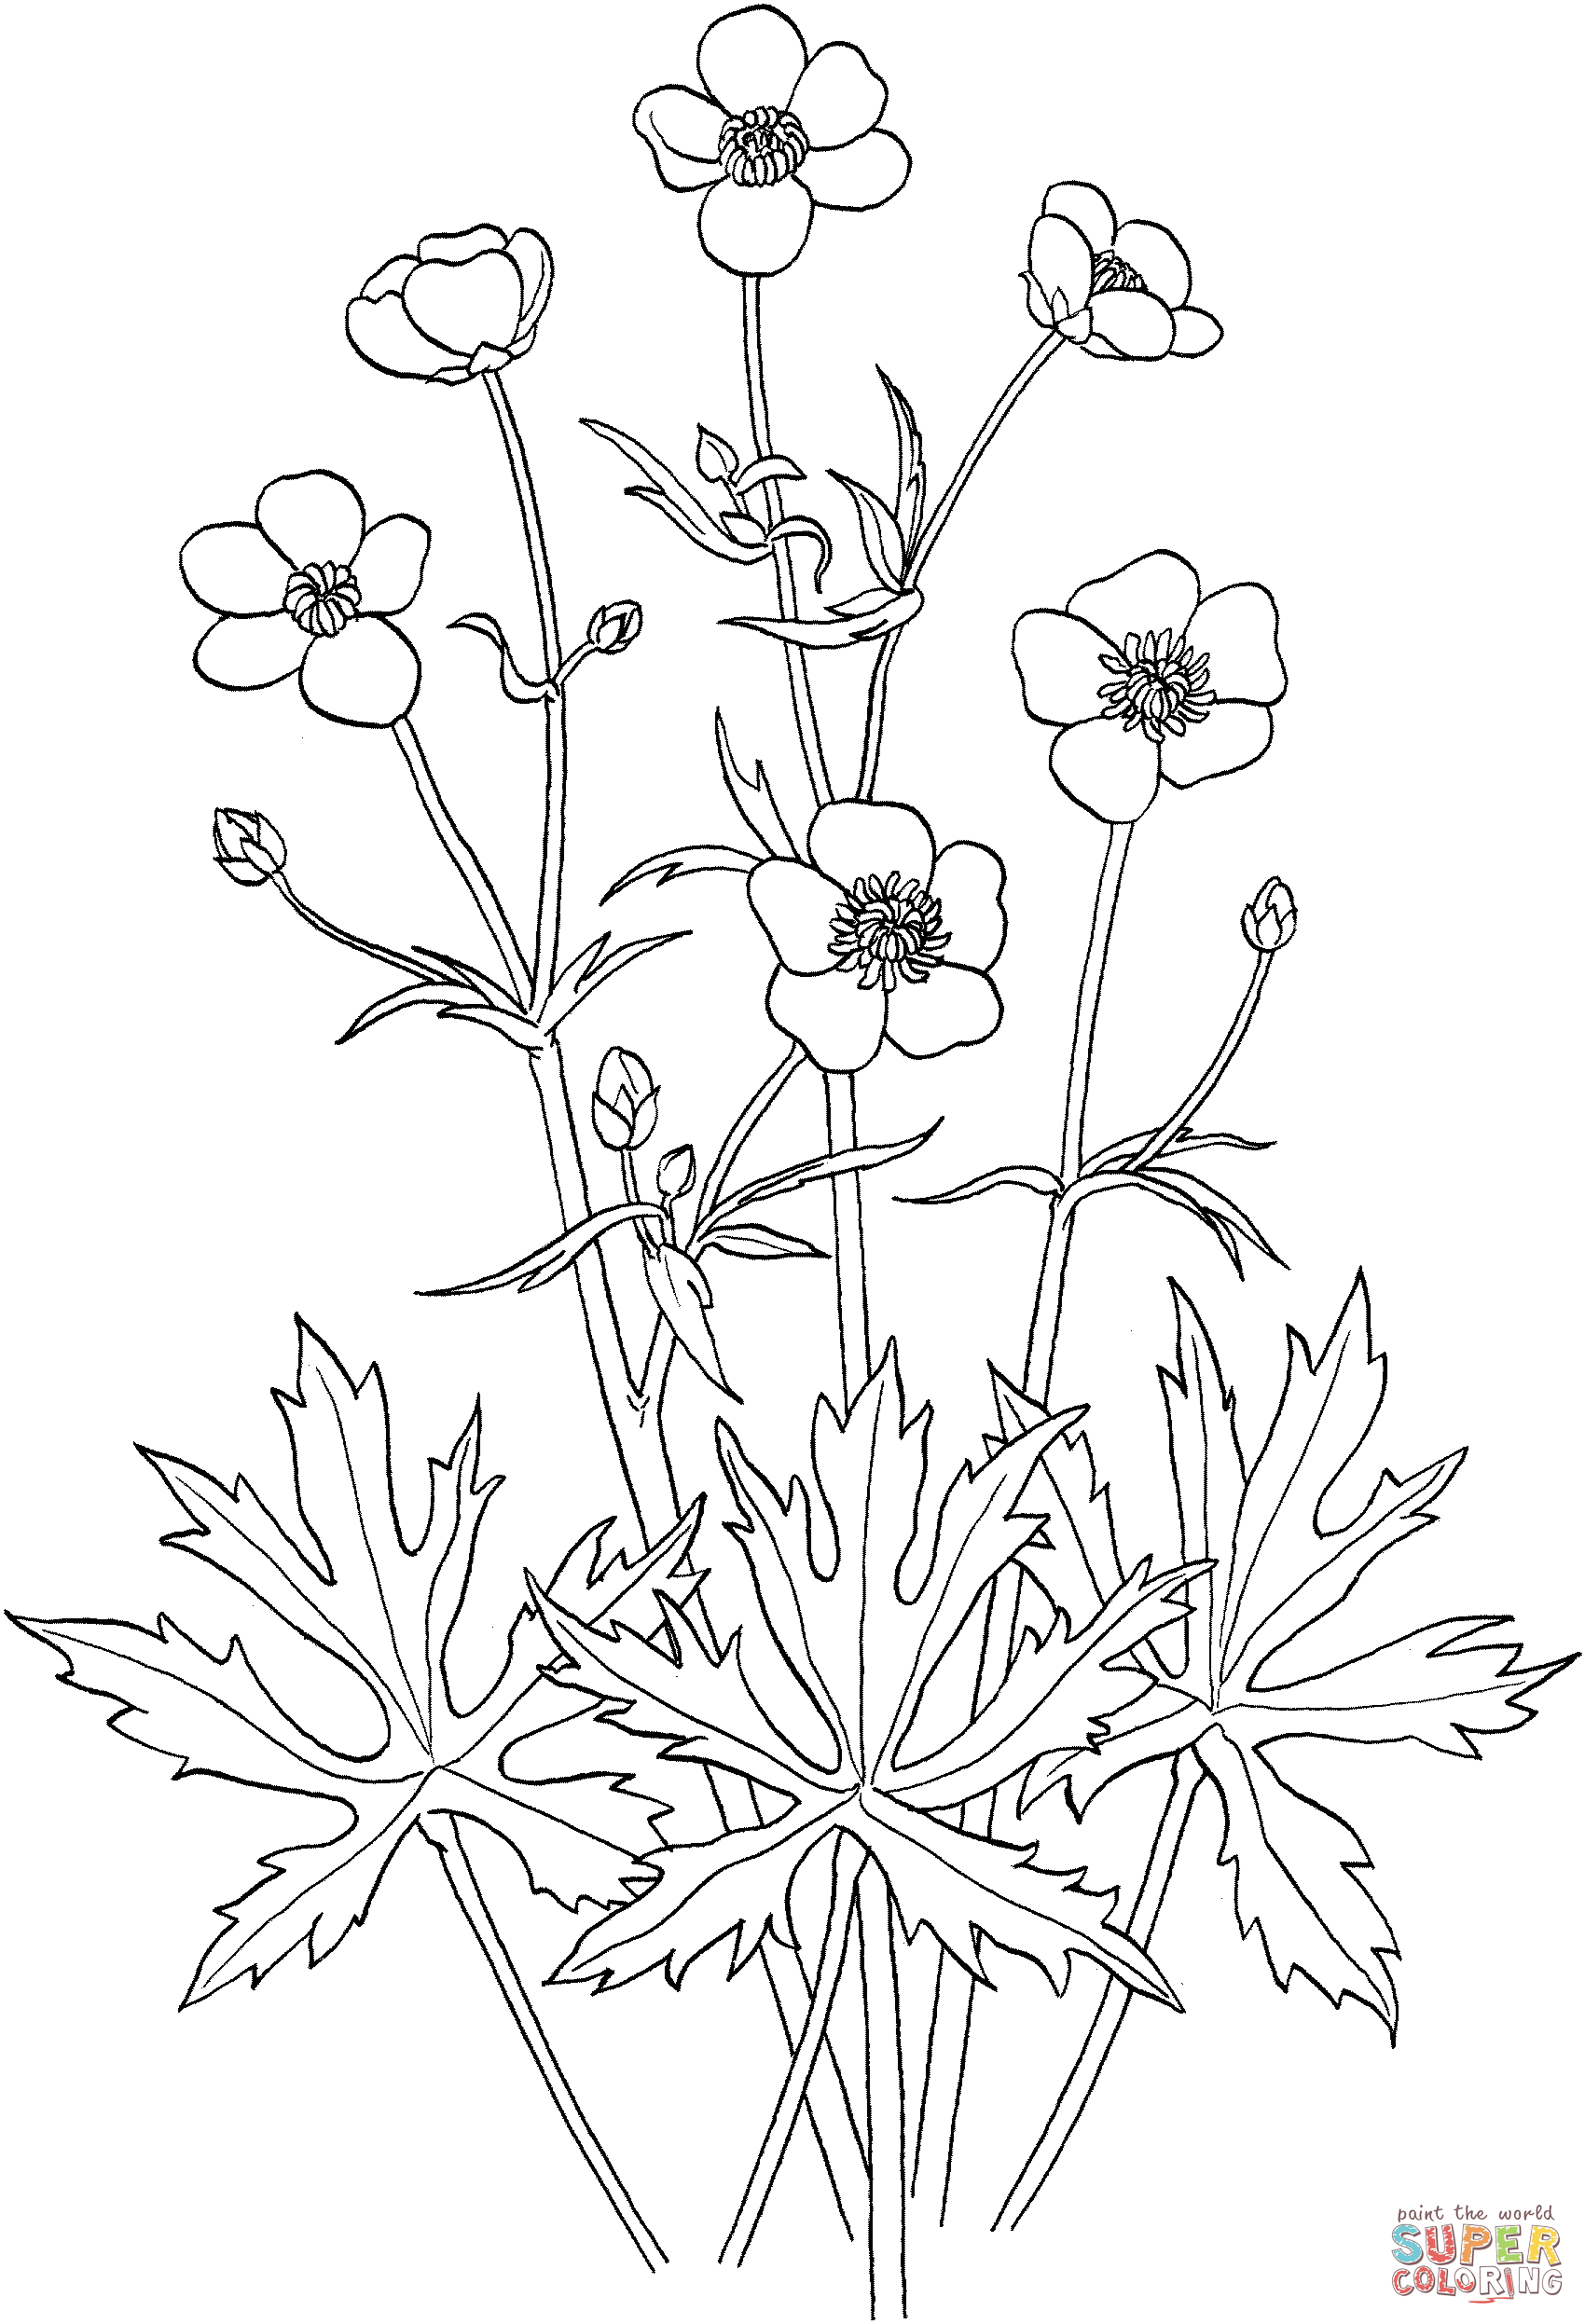 Ranunculus Acris or Tall Buttercup Coloring Page